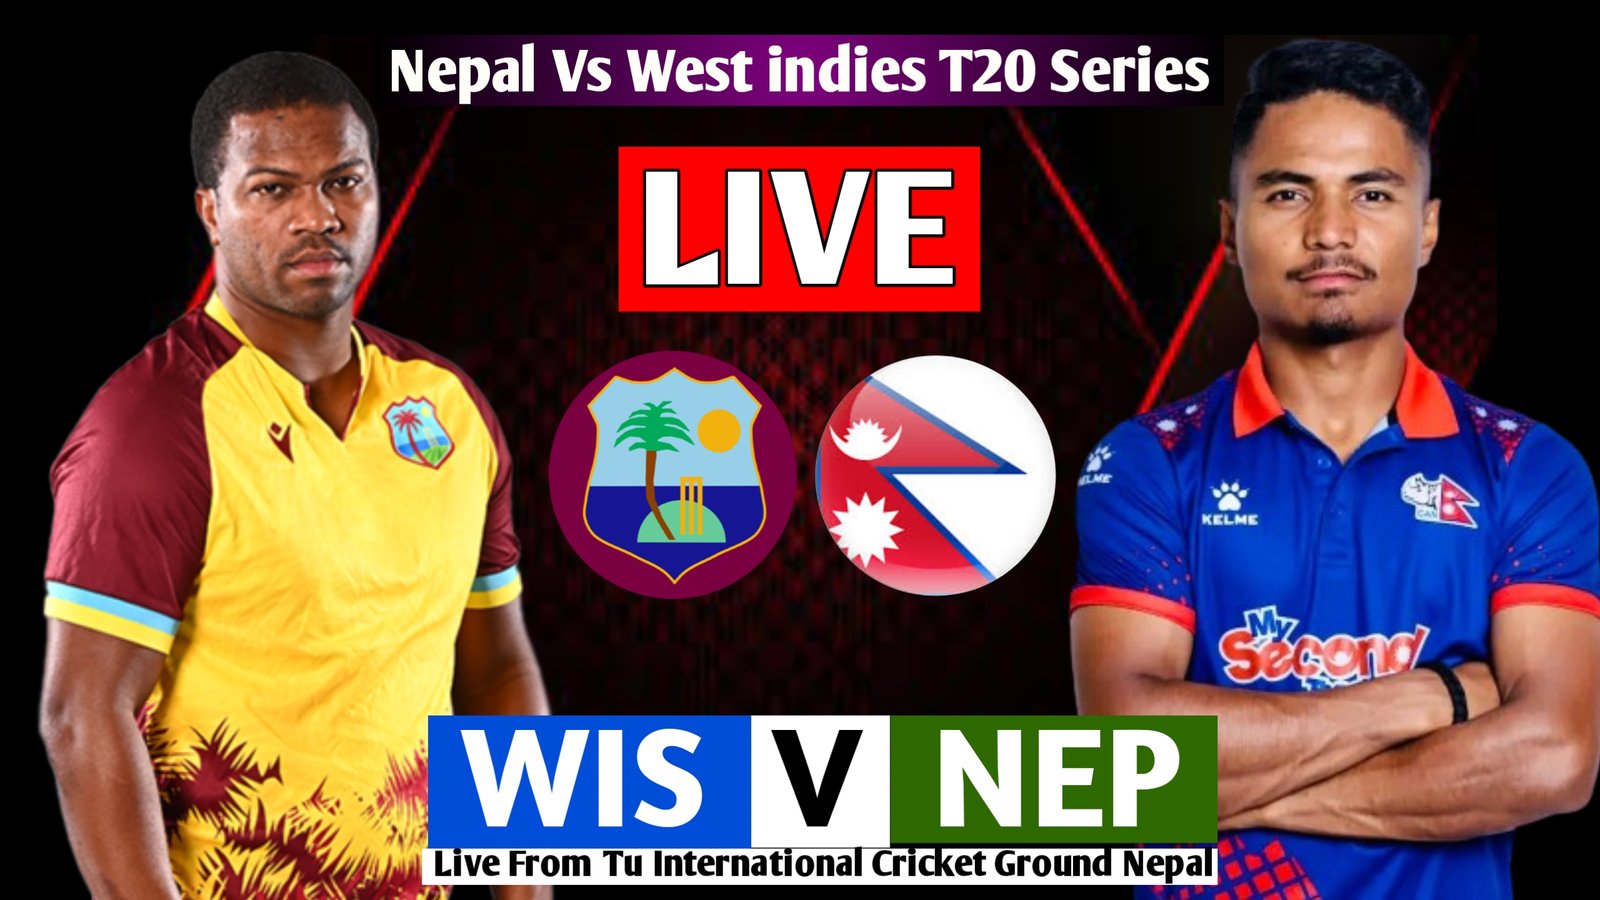 Nepal vs West Indies 2nd T20I: Preview, Predicted XIs, Pitch Conditions, and More